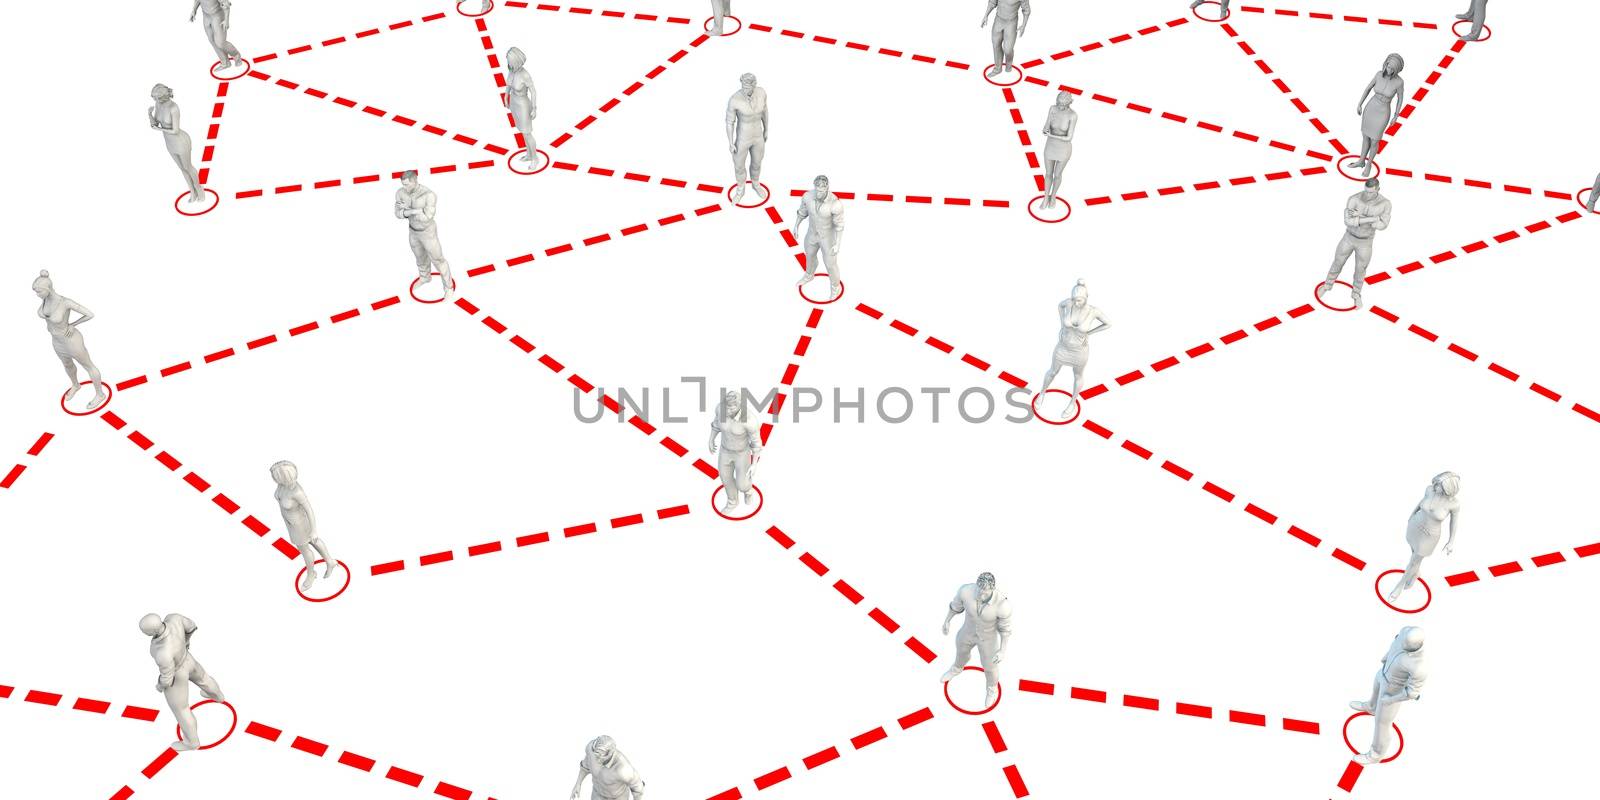 Business People Network Connected Together as Concept